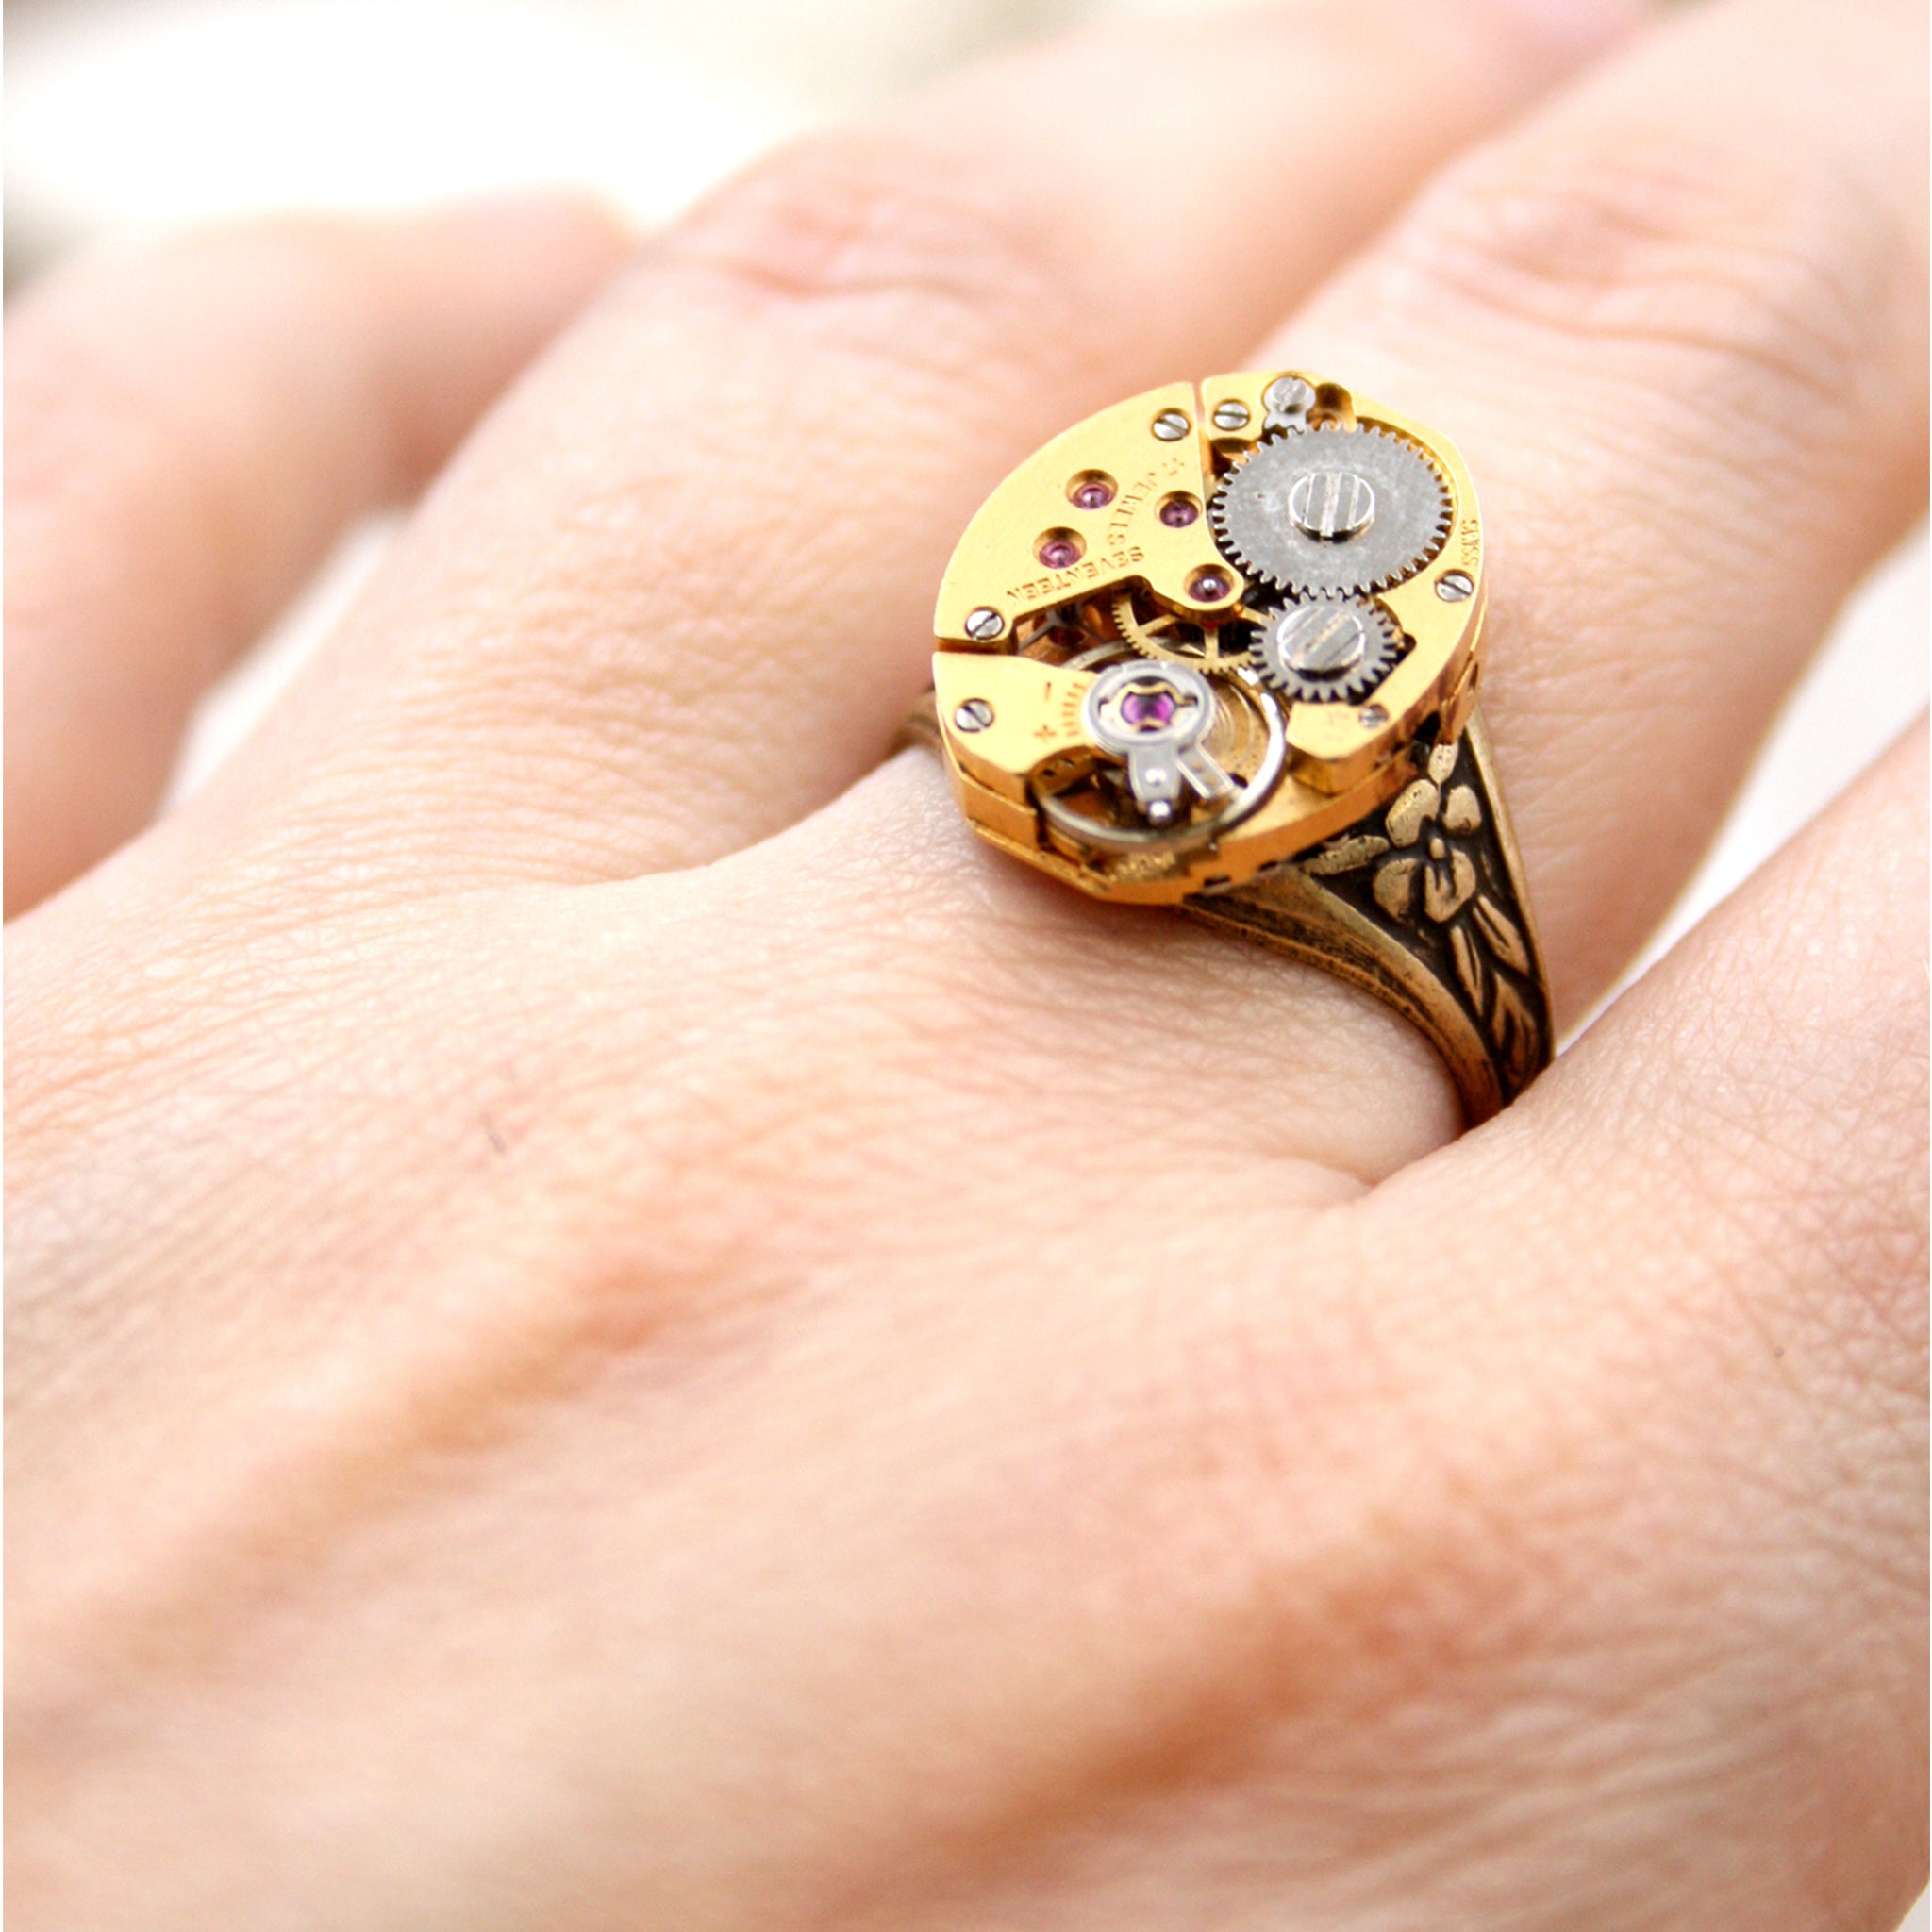 Gold Signet Pinky Ring in steampunk style made of watch inside